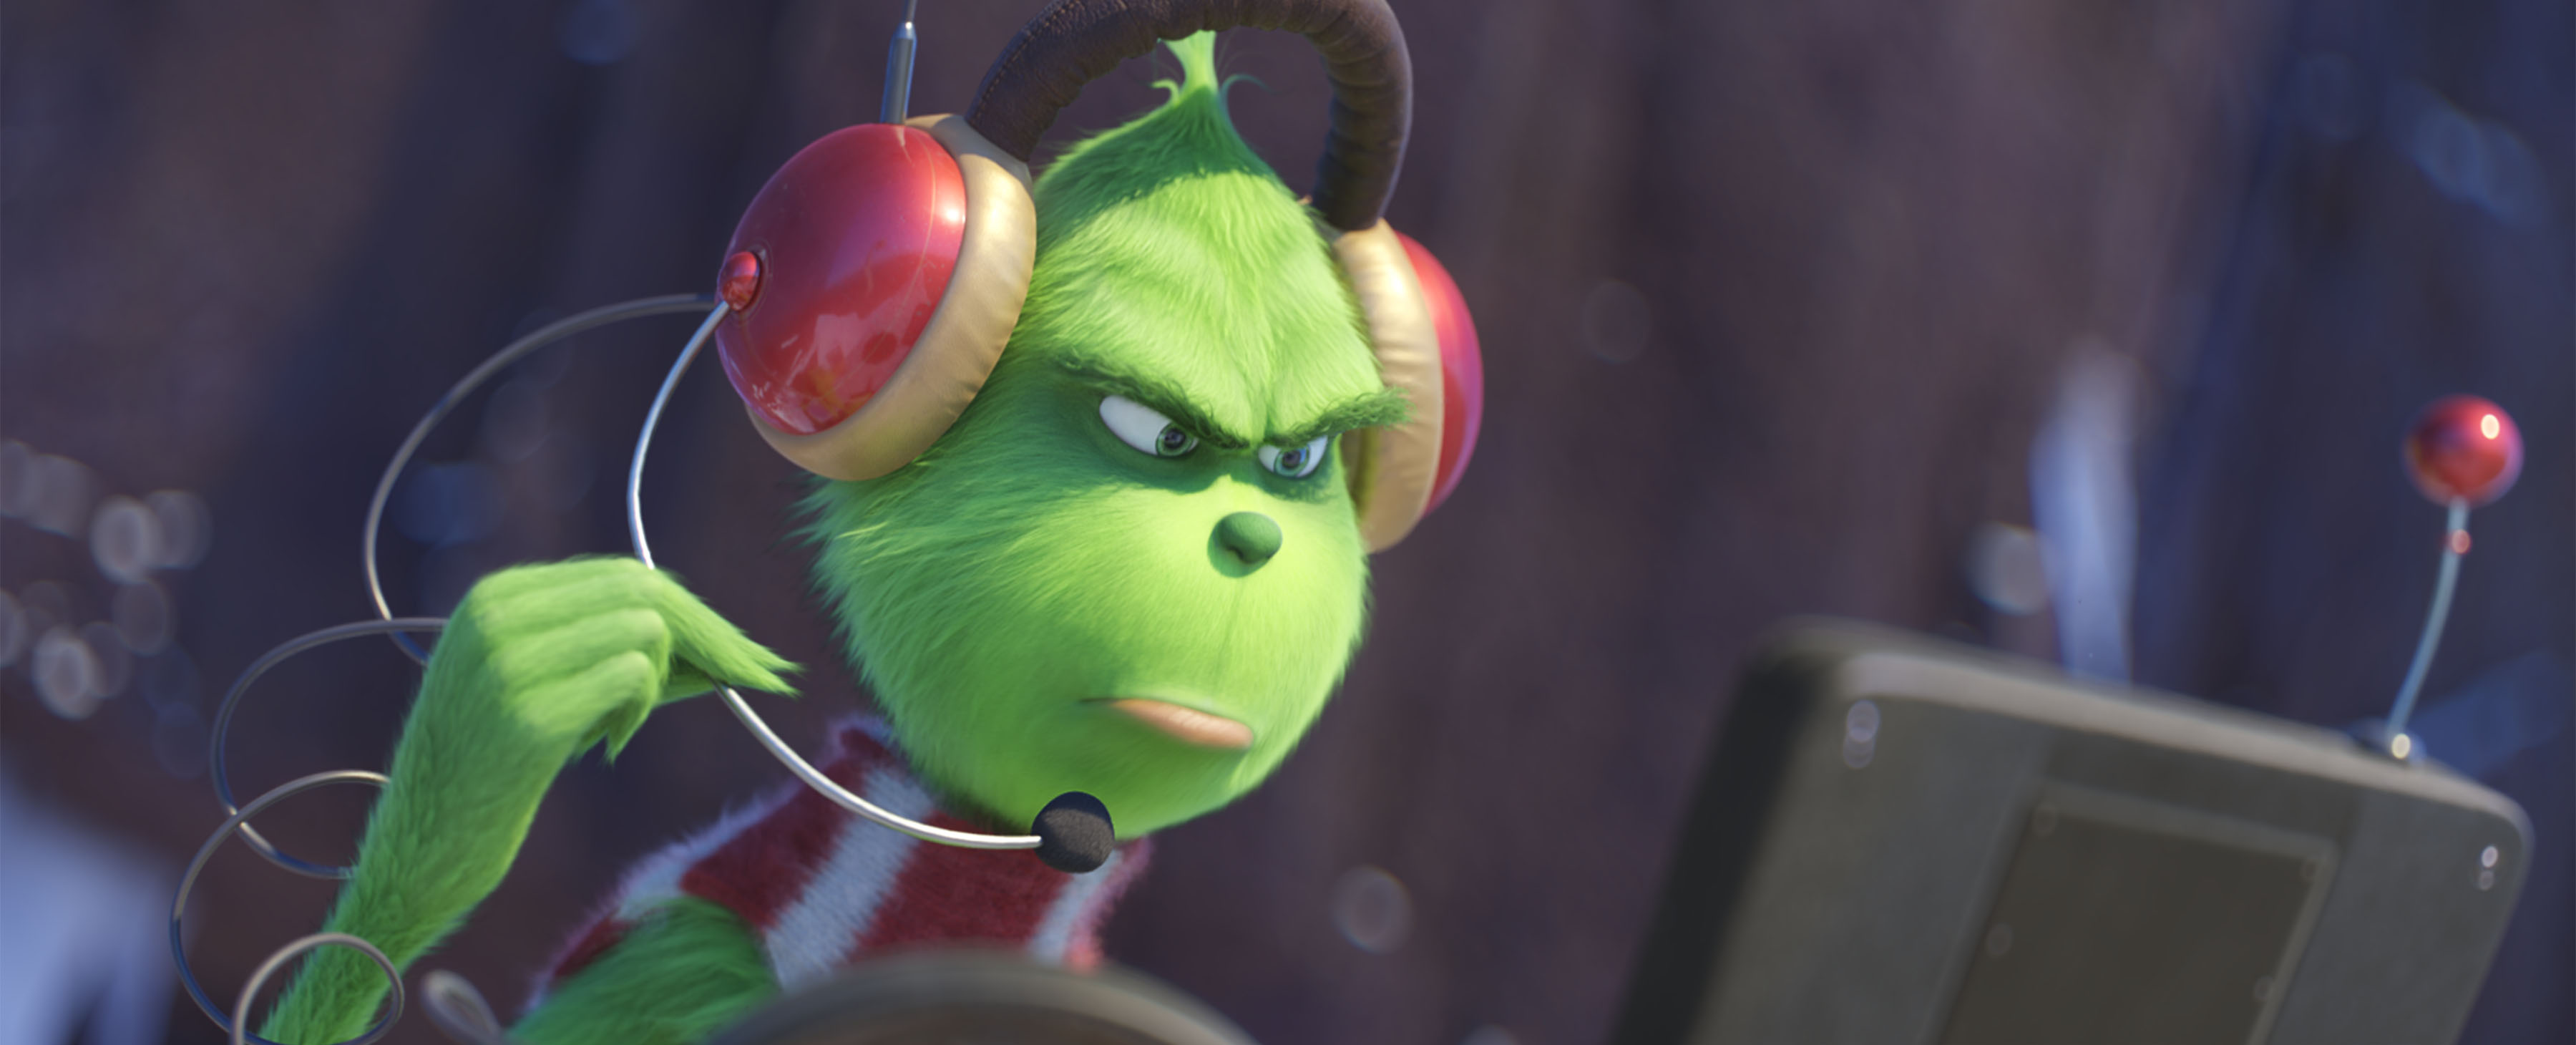 The Grinch trailer, Cute yet bitter Grinch, Christmas frustration, Irresistible holiday movie, 3600x1460 Dual Screen Desktop